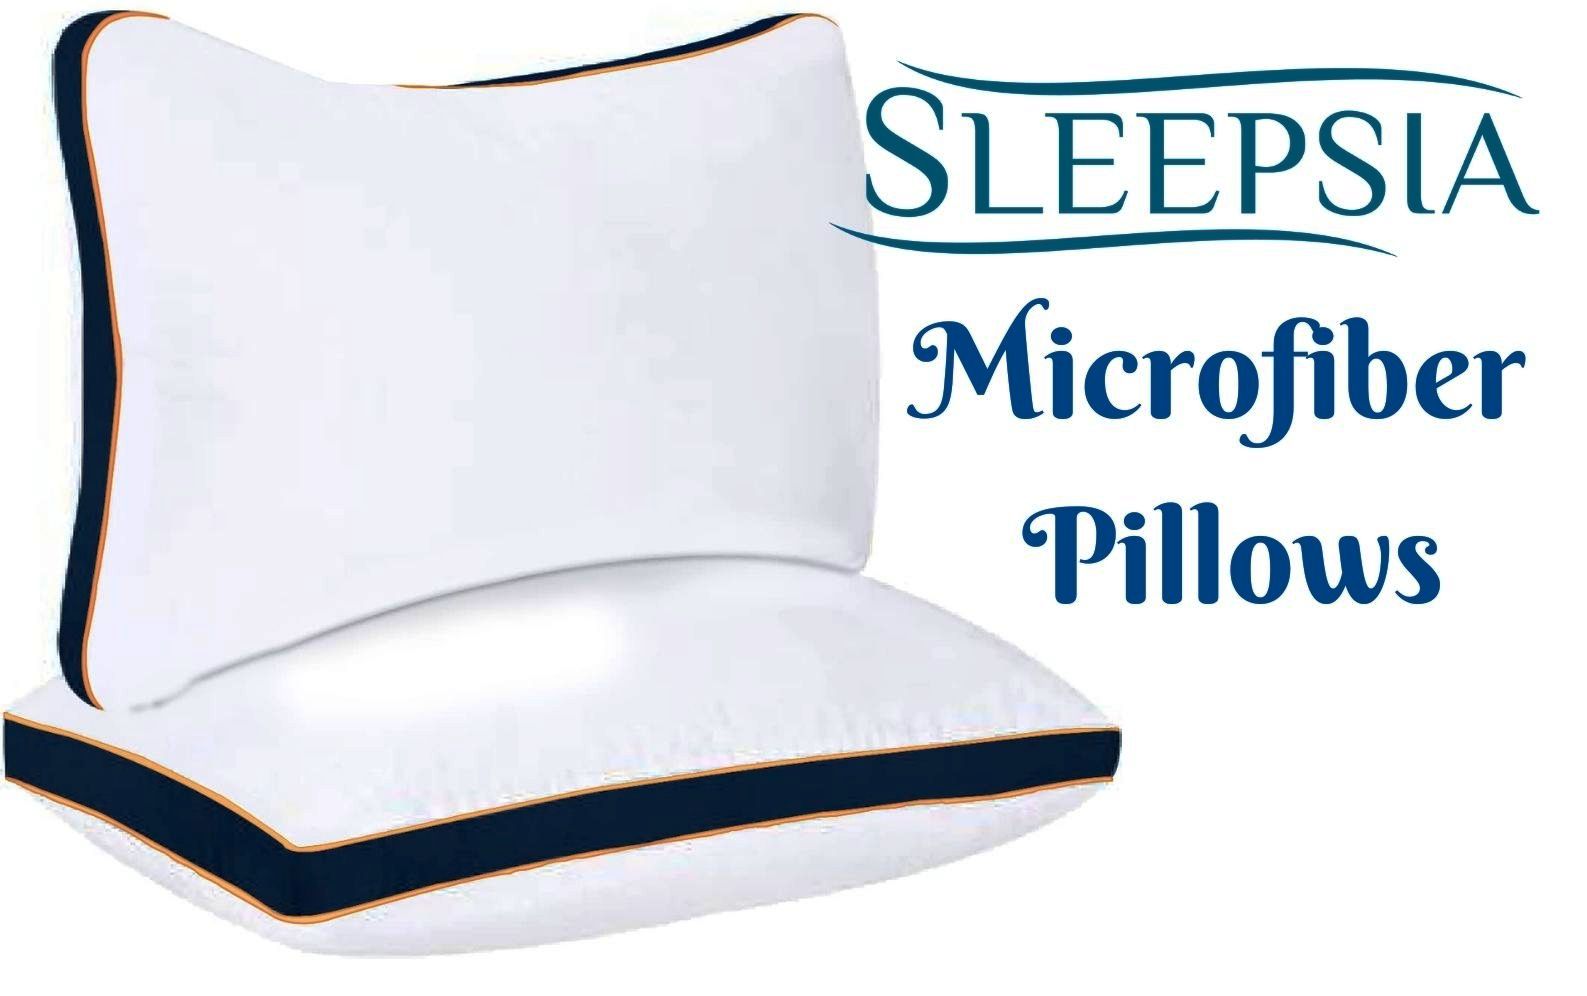 The Microfiber Pillows That Everyone Is Talking About